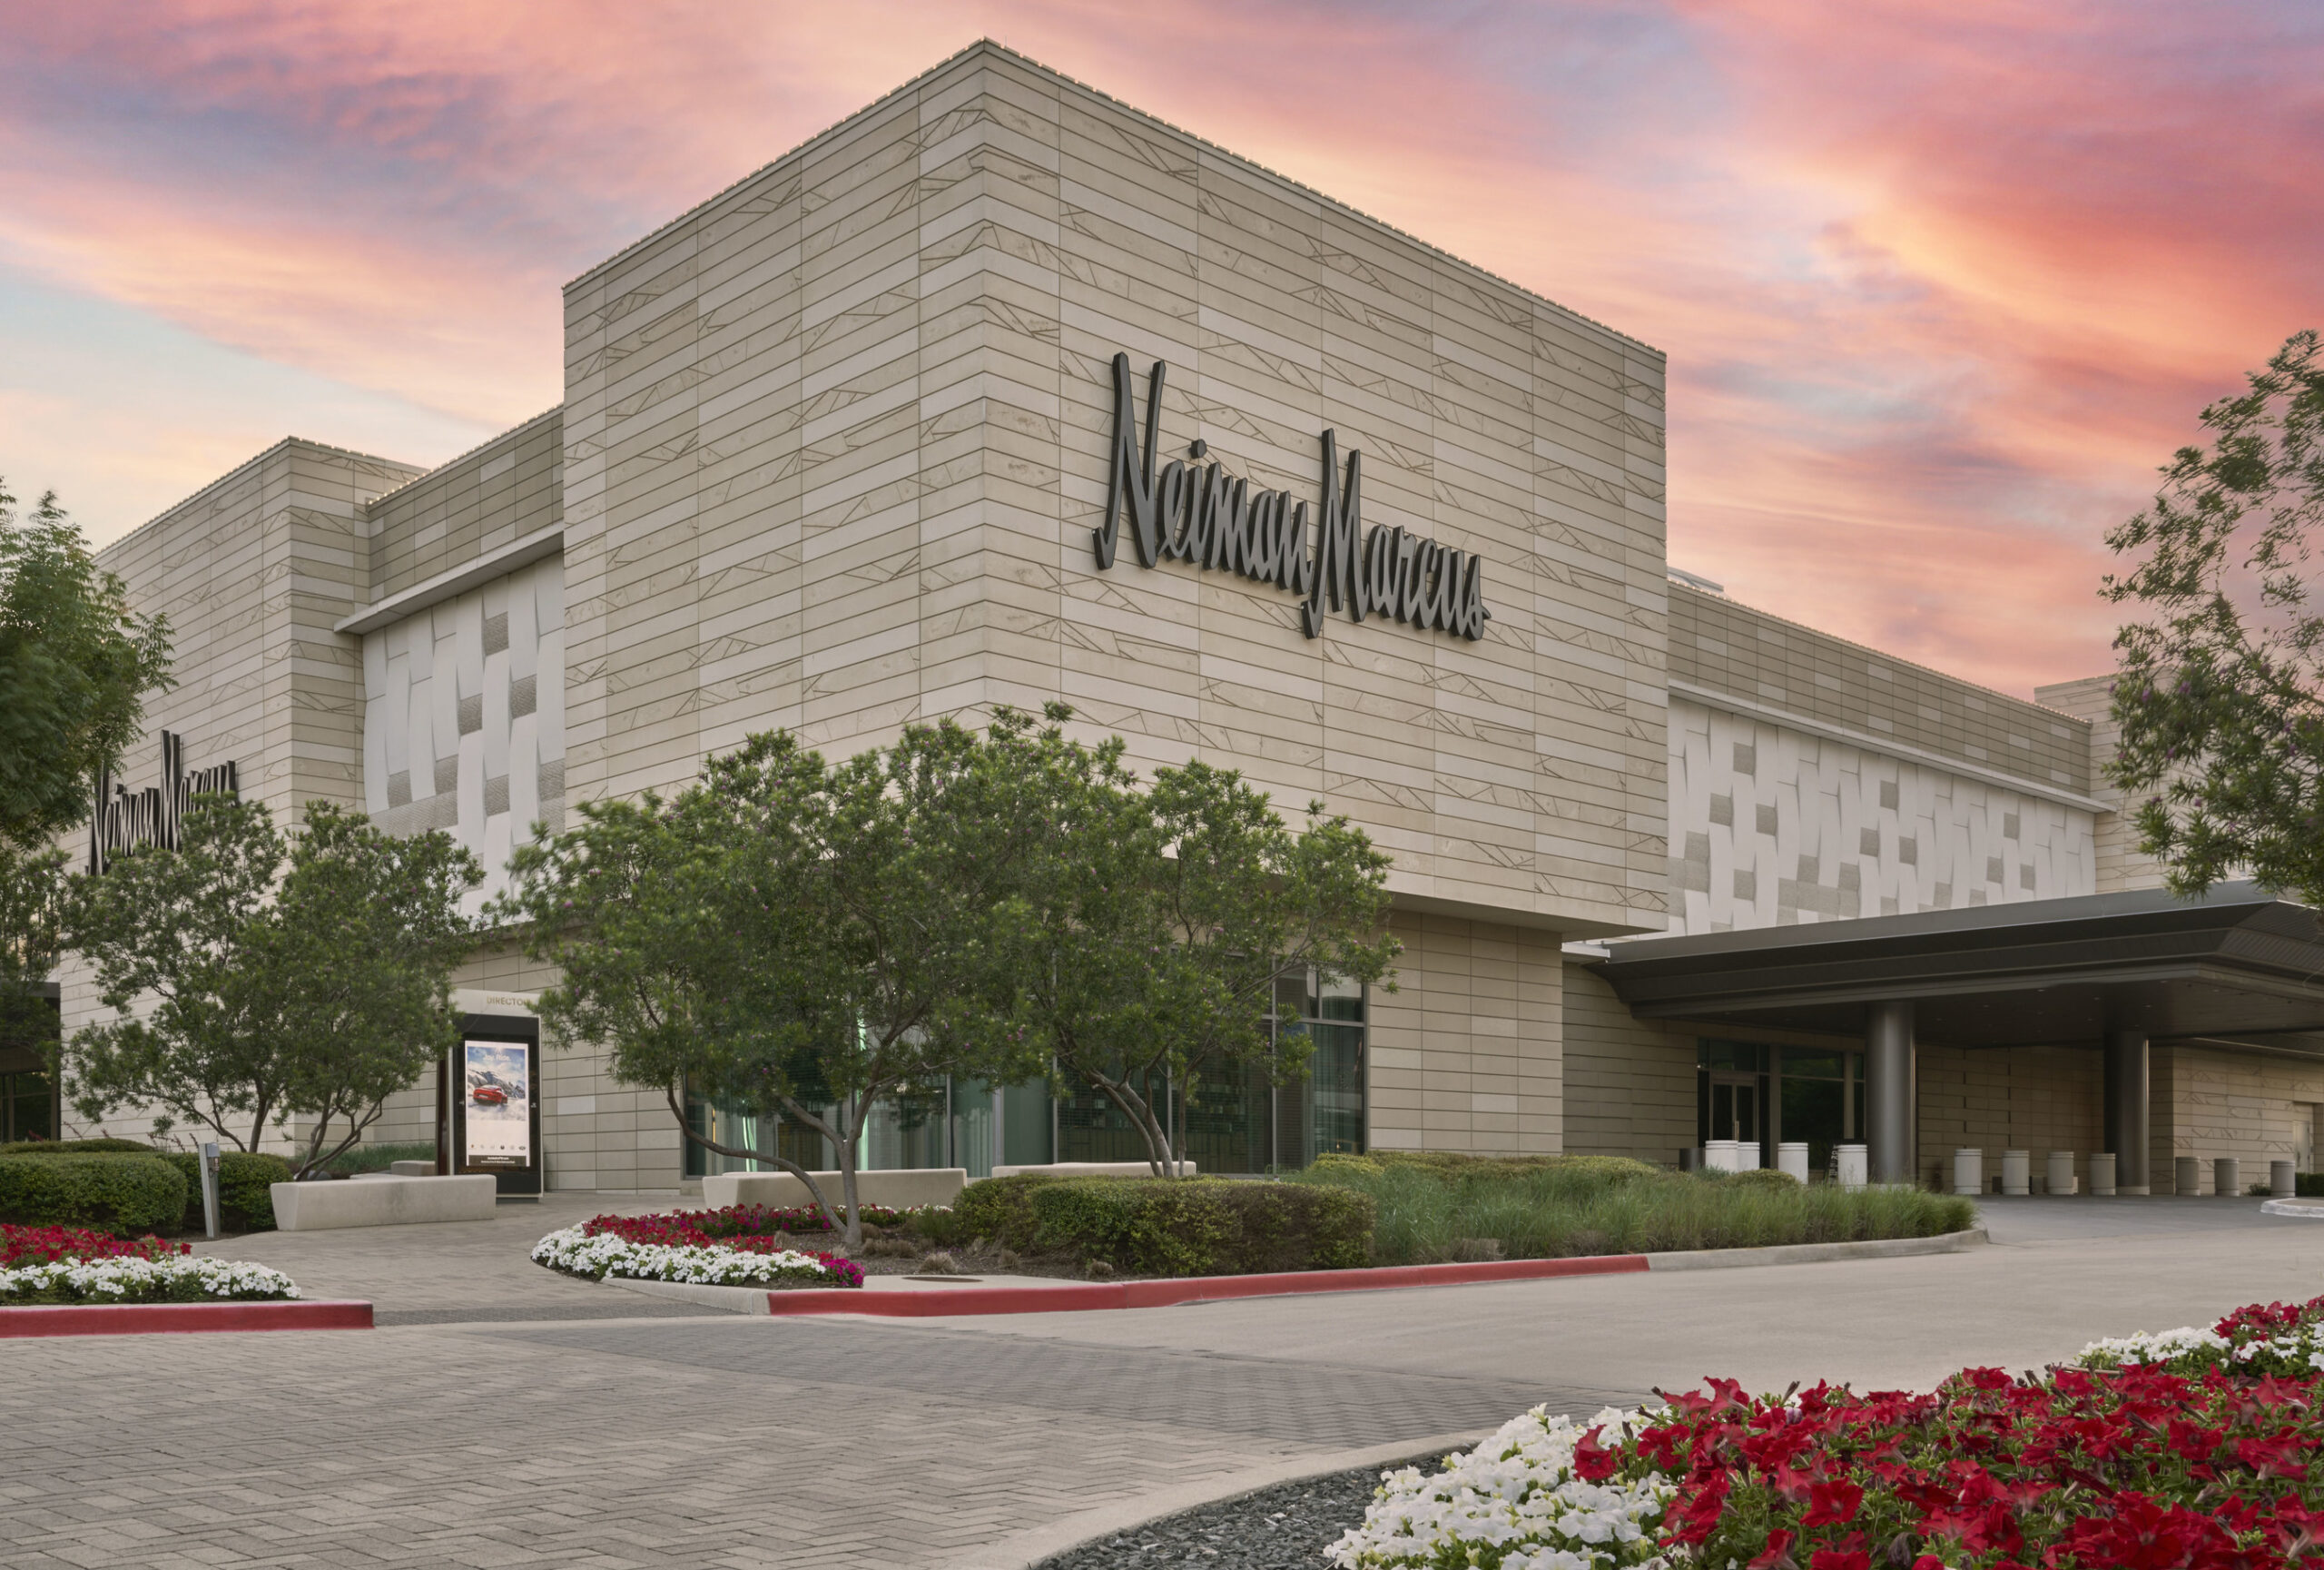 Texas-based Neiman Marcus emerges from bankruptcy with new owners -  CultureMap Houston